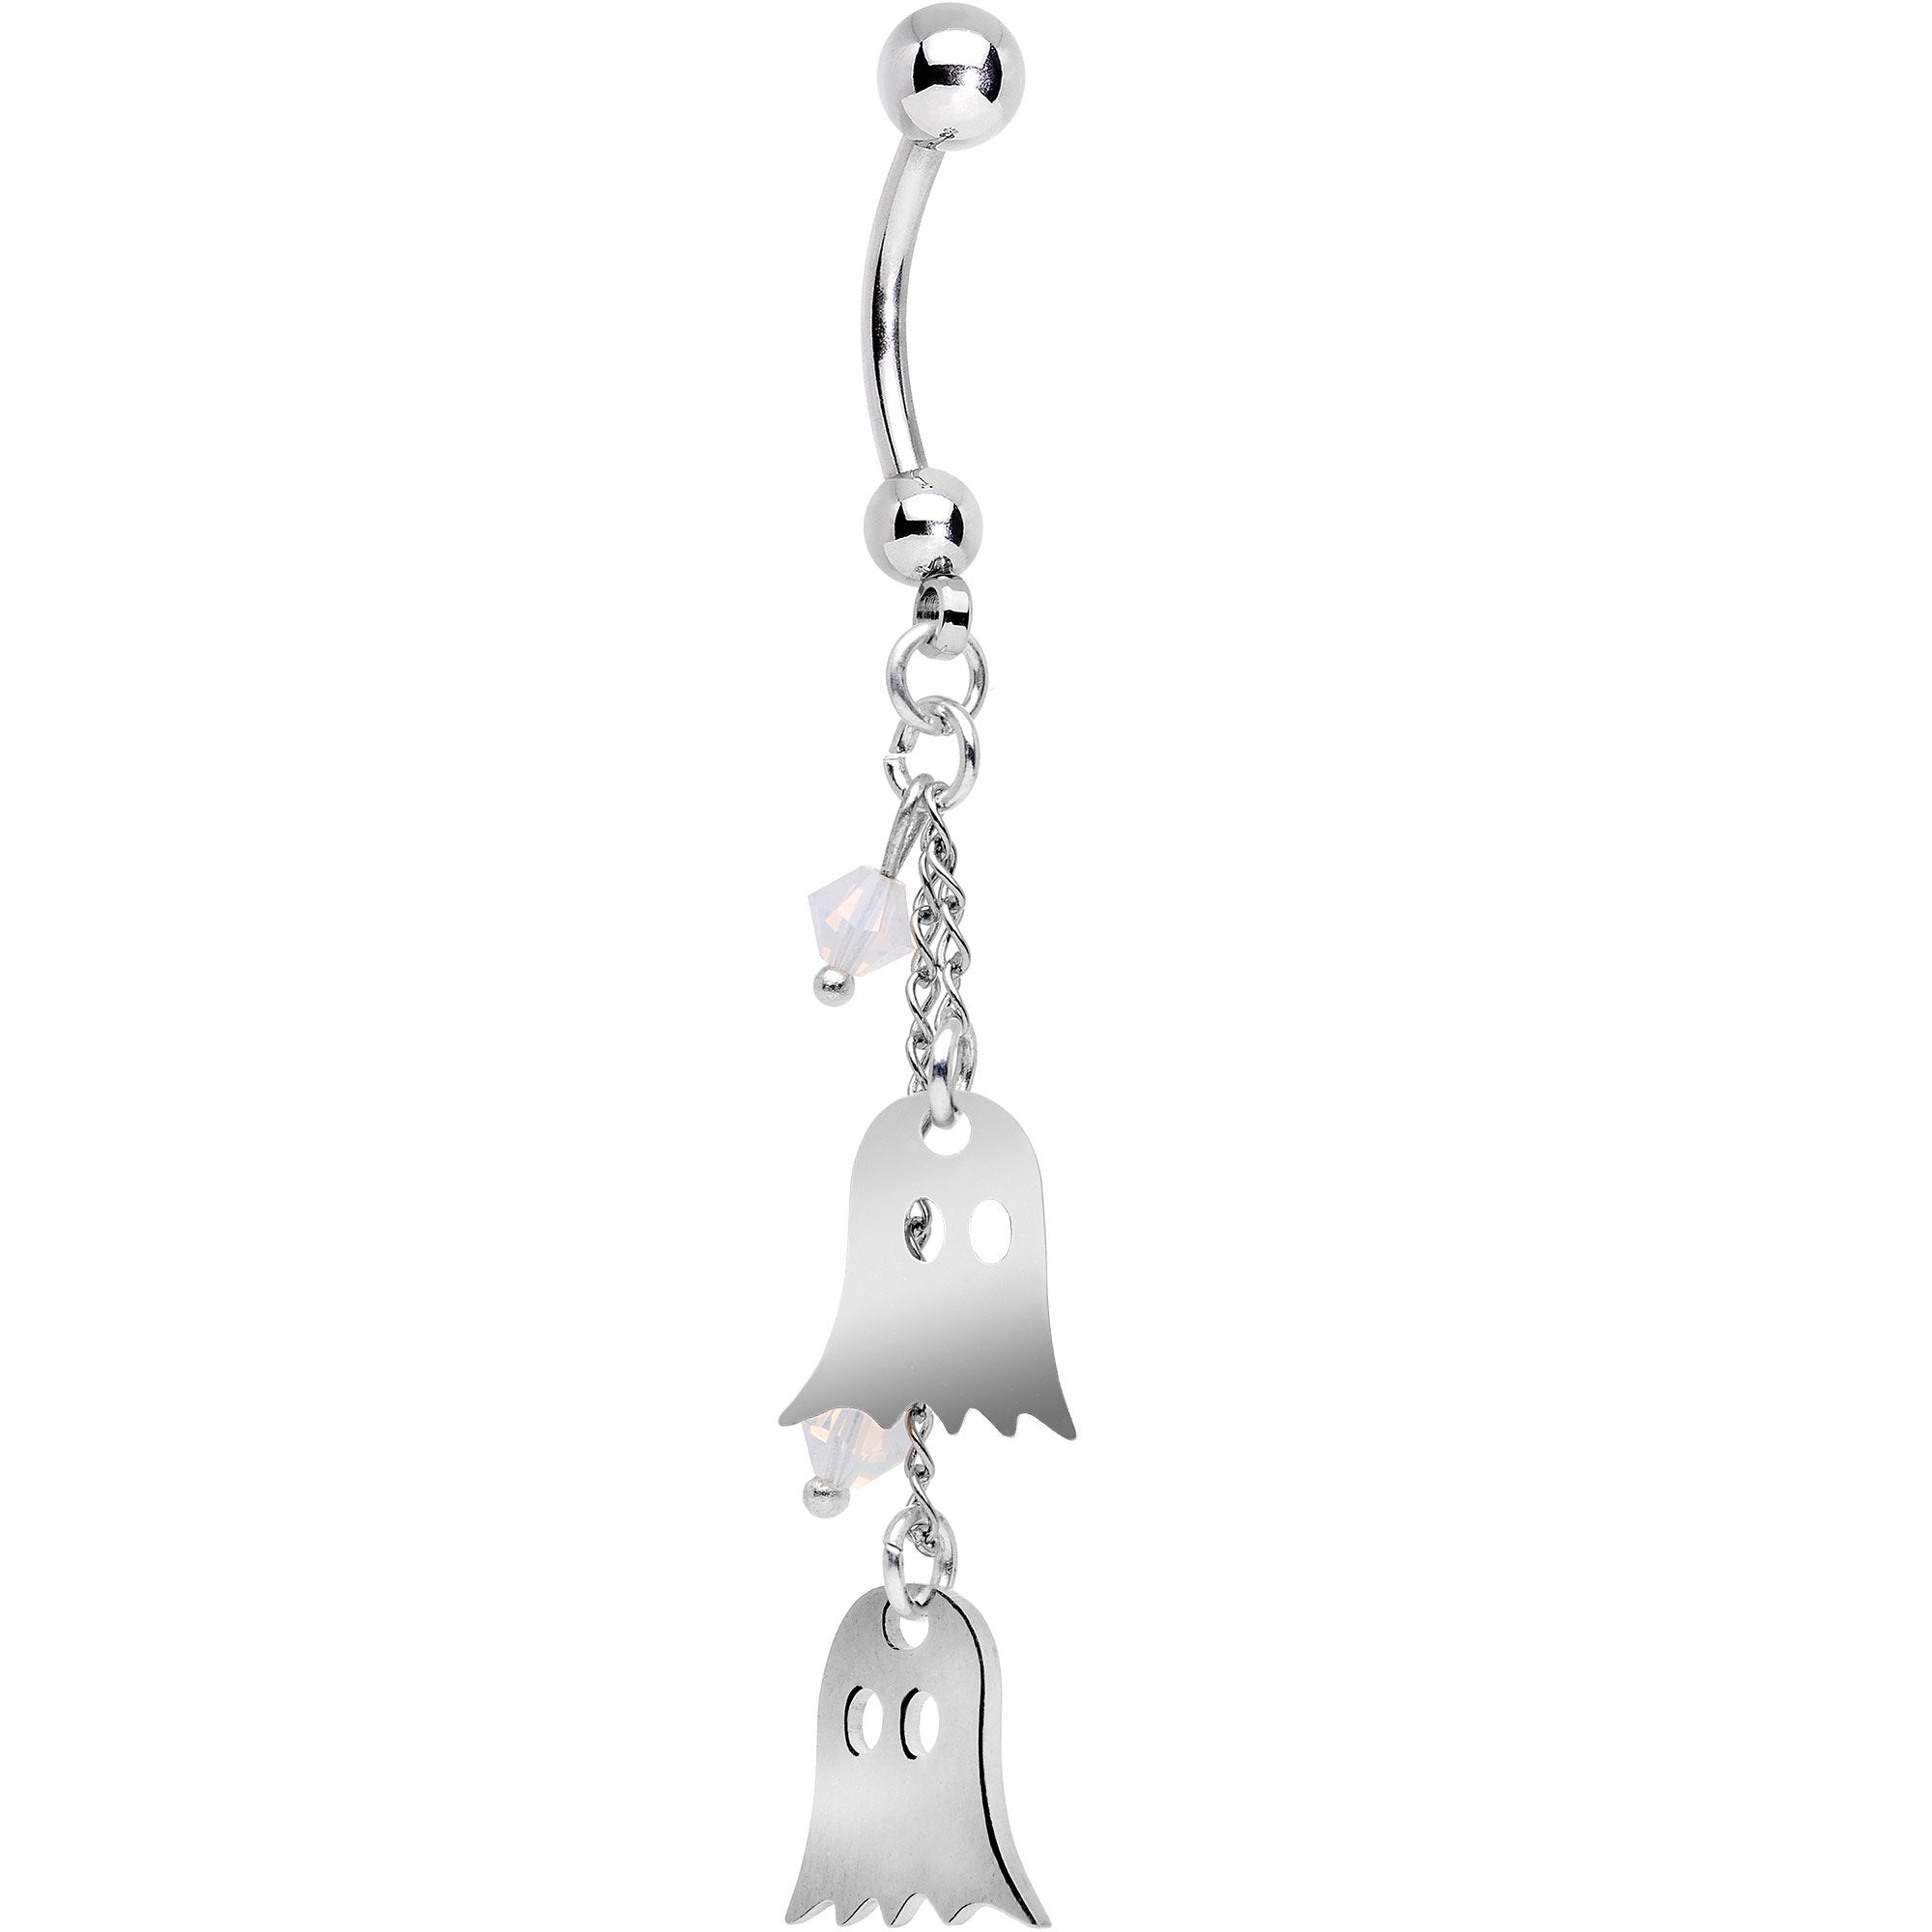 Handcrafted Ghost Dangle Belly Ring Created with Crystals